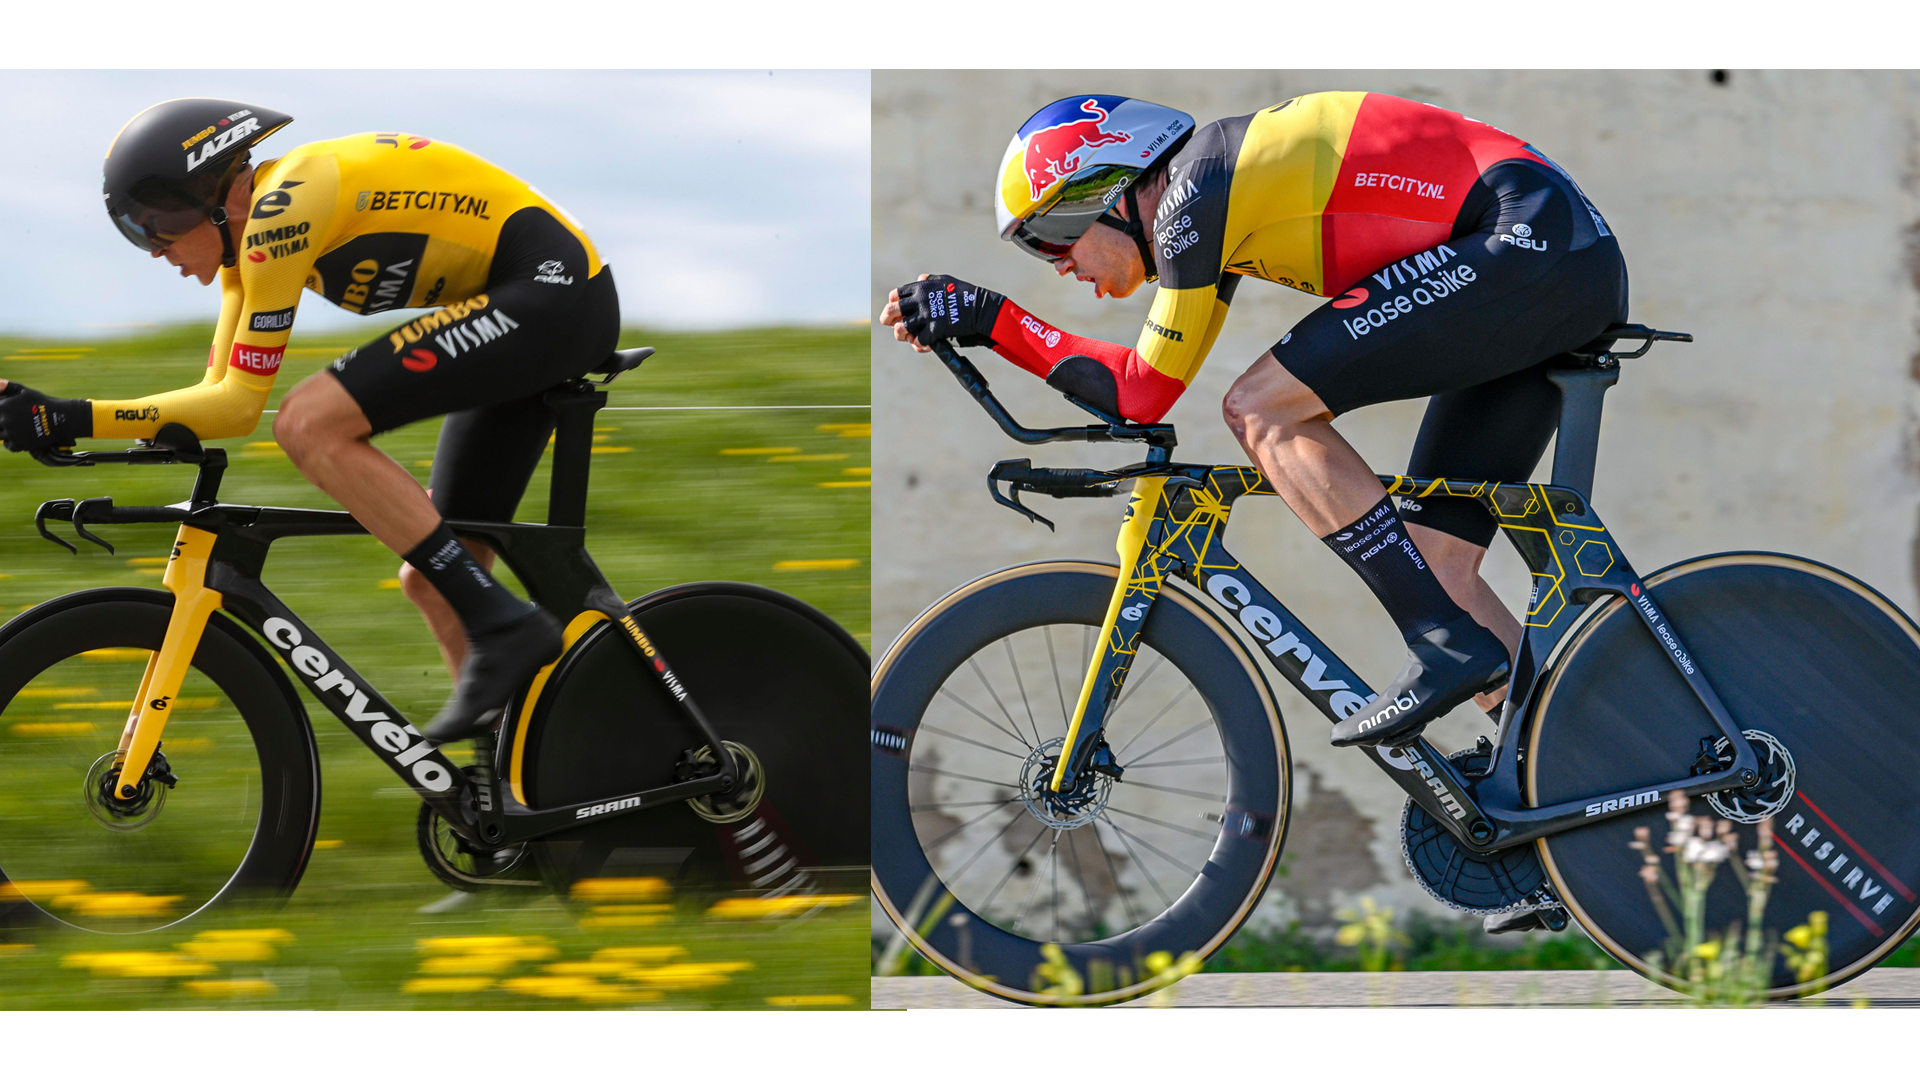 The photo shows a comparison of the old and new Cervelo P5 side by side.